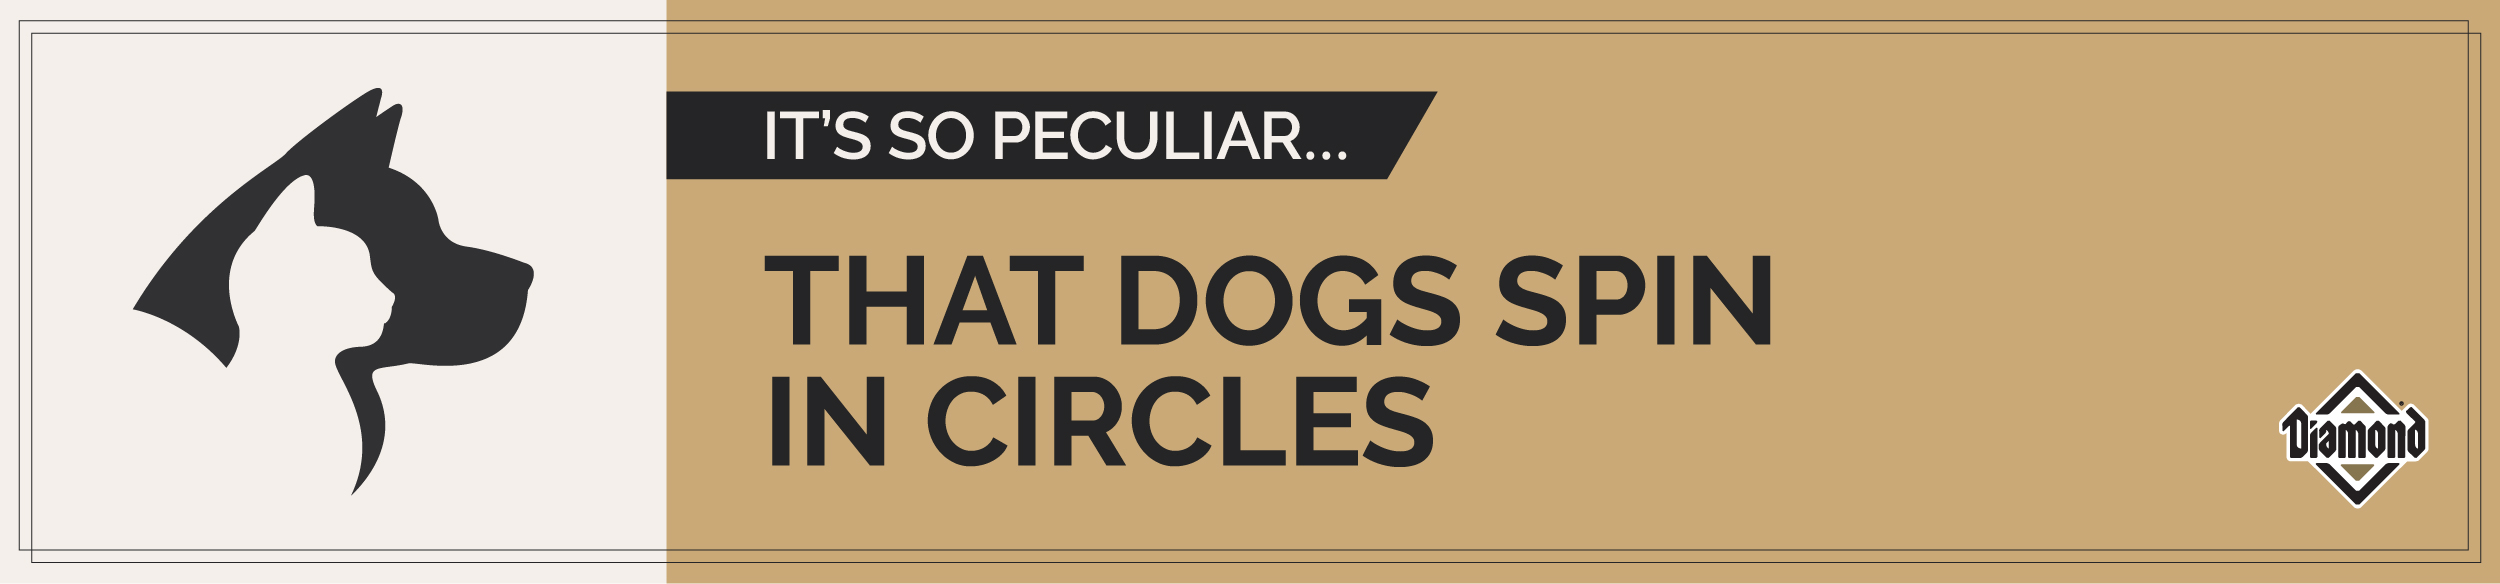 Text Graphic saying “It’s so peculiar that dogs spin in circles” | Diamond Pet Foods